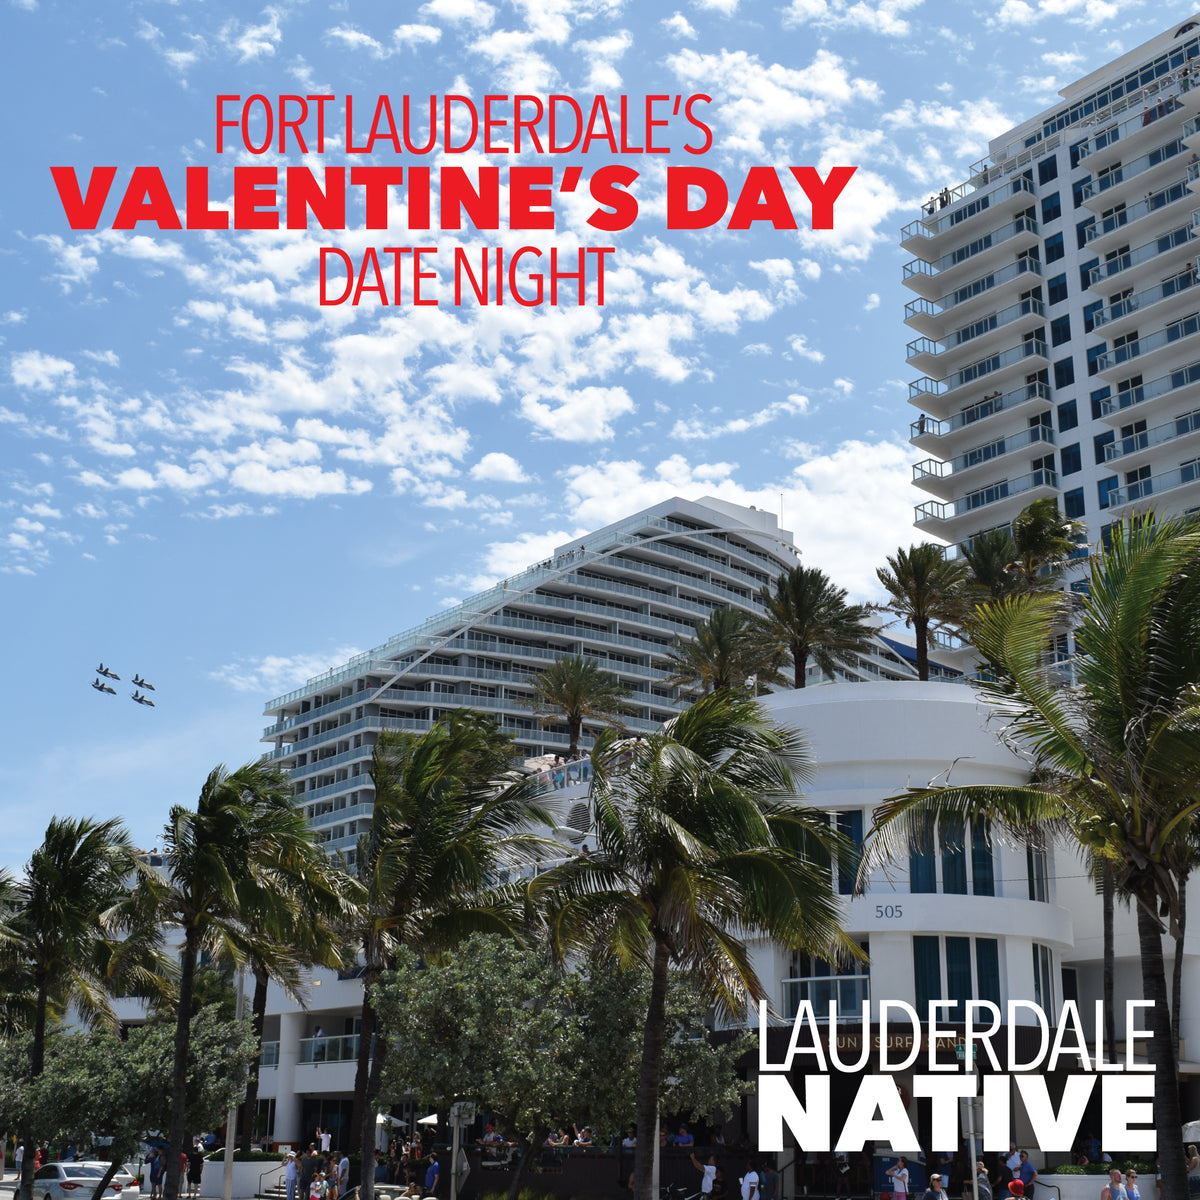 Top 10 Fort Lauderdale Restaurants for Valentine's Day Lauderdale Native